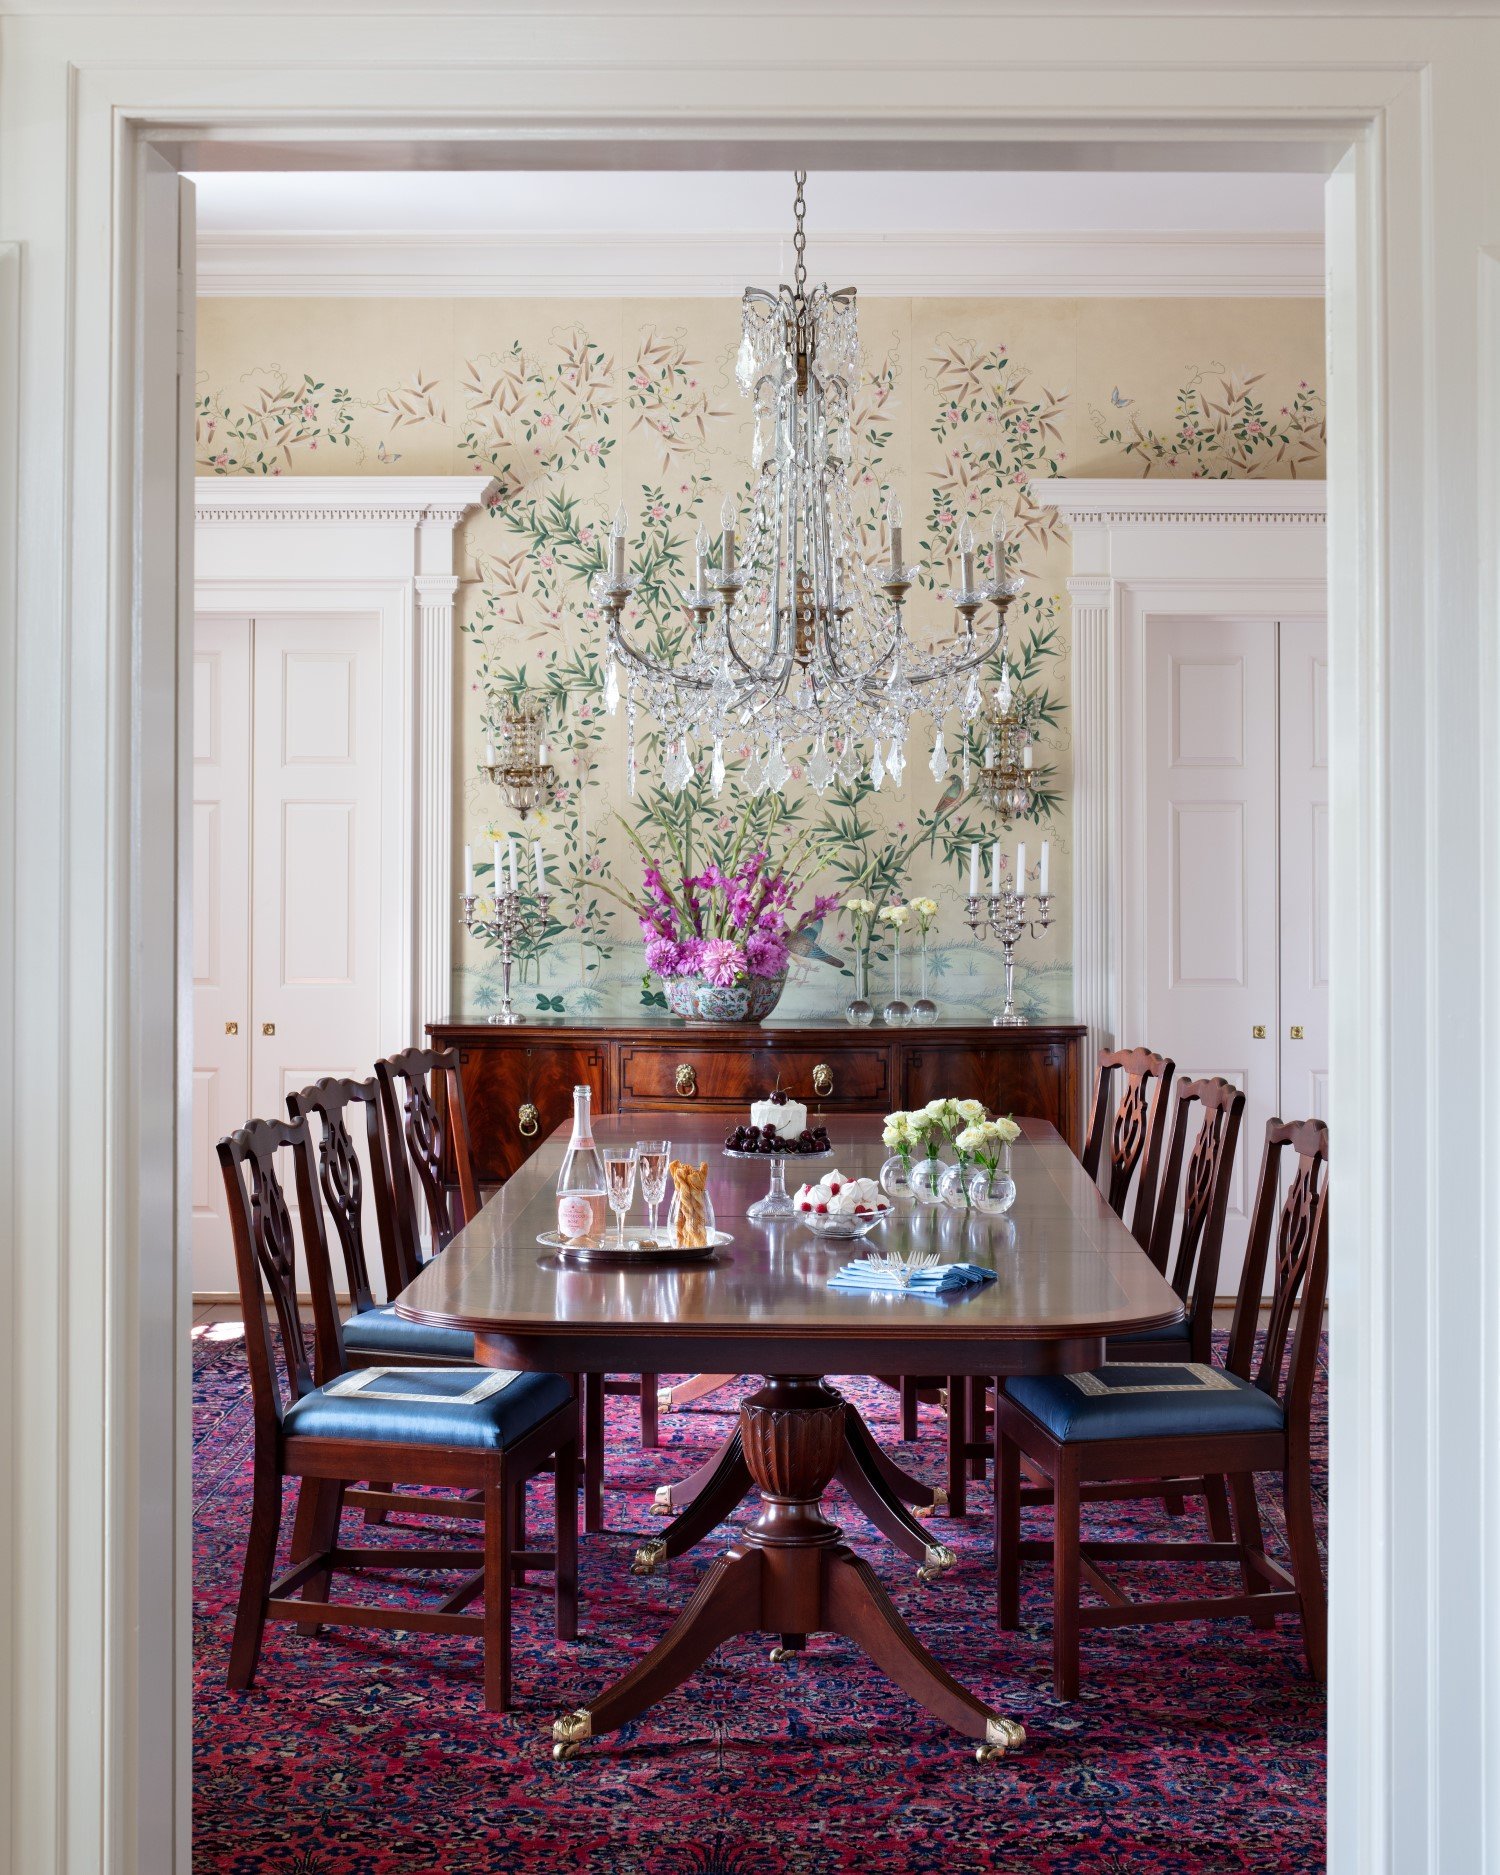  Formal dining room with classically designed furniture, an ornate crystal chandelier, and nature-inspired wallpaper by Bridget Beari Designs 